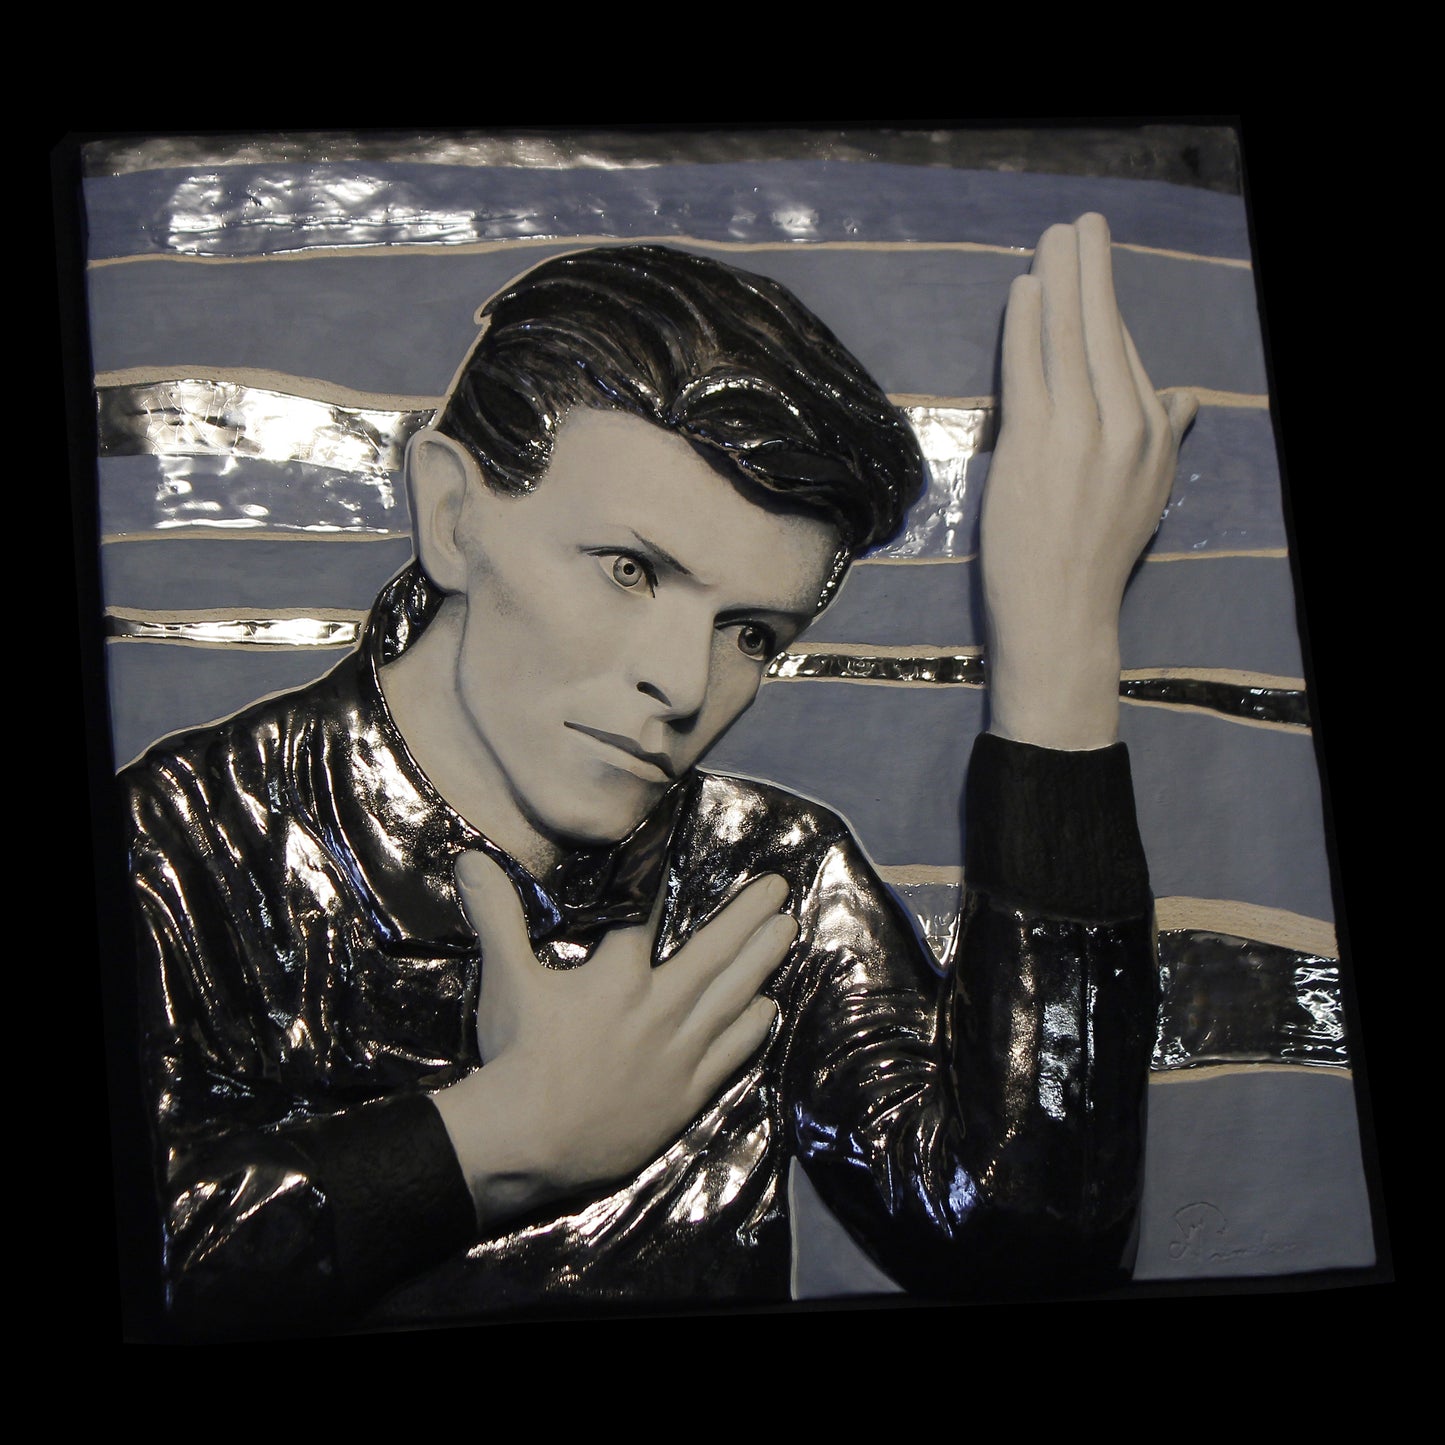 David Bowie - 3D 'Heroes' Wall Panel Sculpture Painted Ceramic